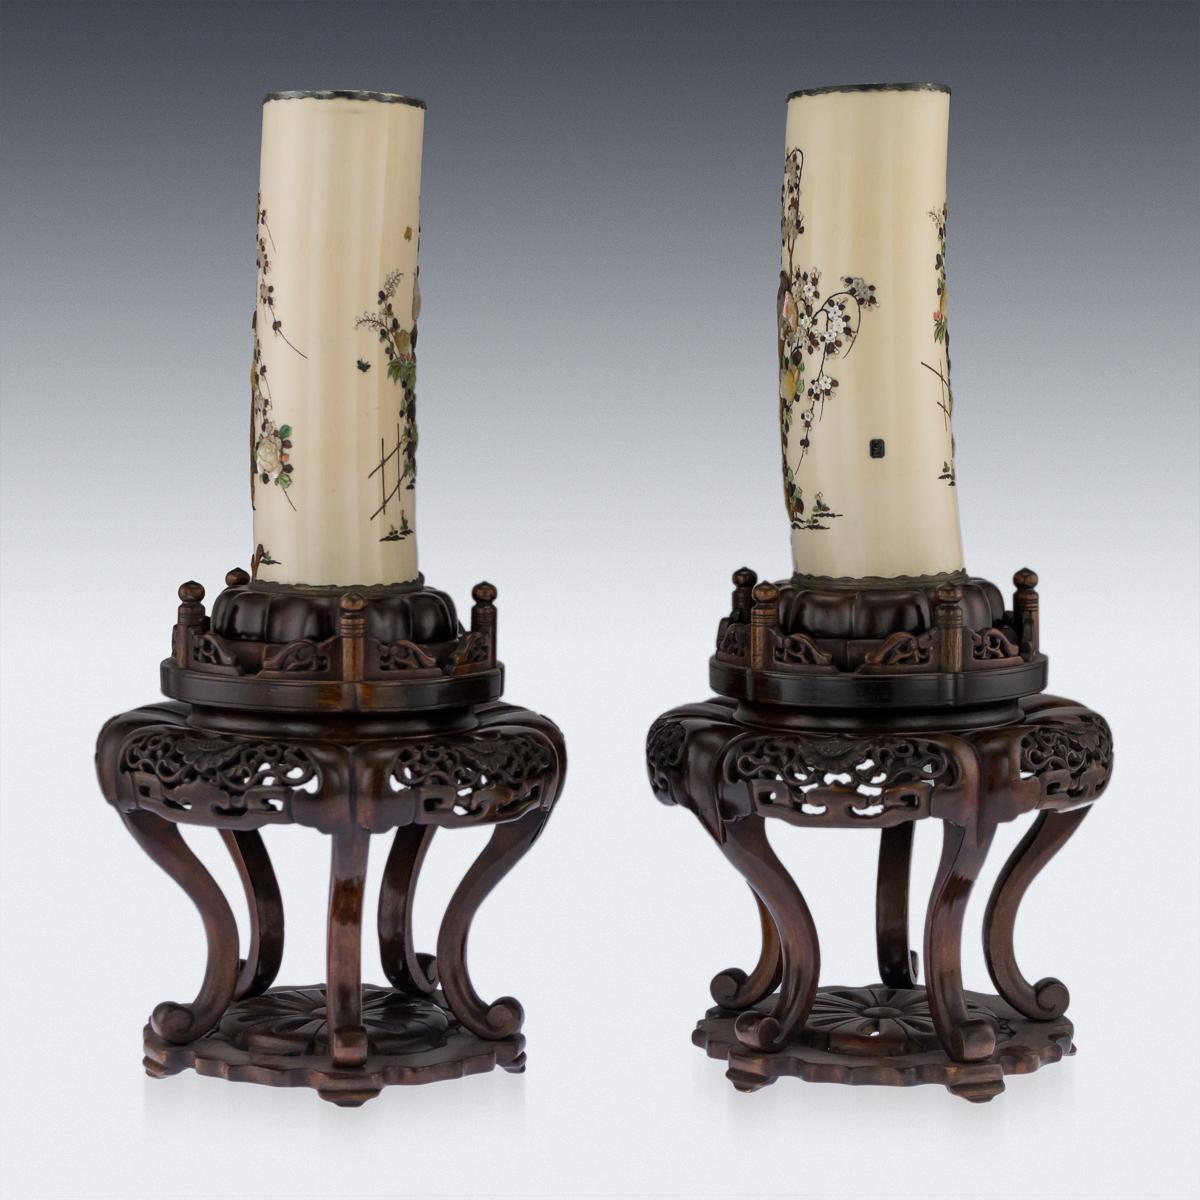 Description

Antique late-19th century Japanese Meiji period shibayama pair of vases on elaborate stands, tops applied with pierced silver rims and bases with revolving top carved wood stands, the sides of each vase intricately inlaid, one side